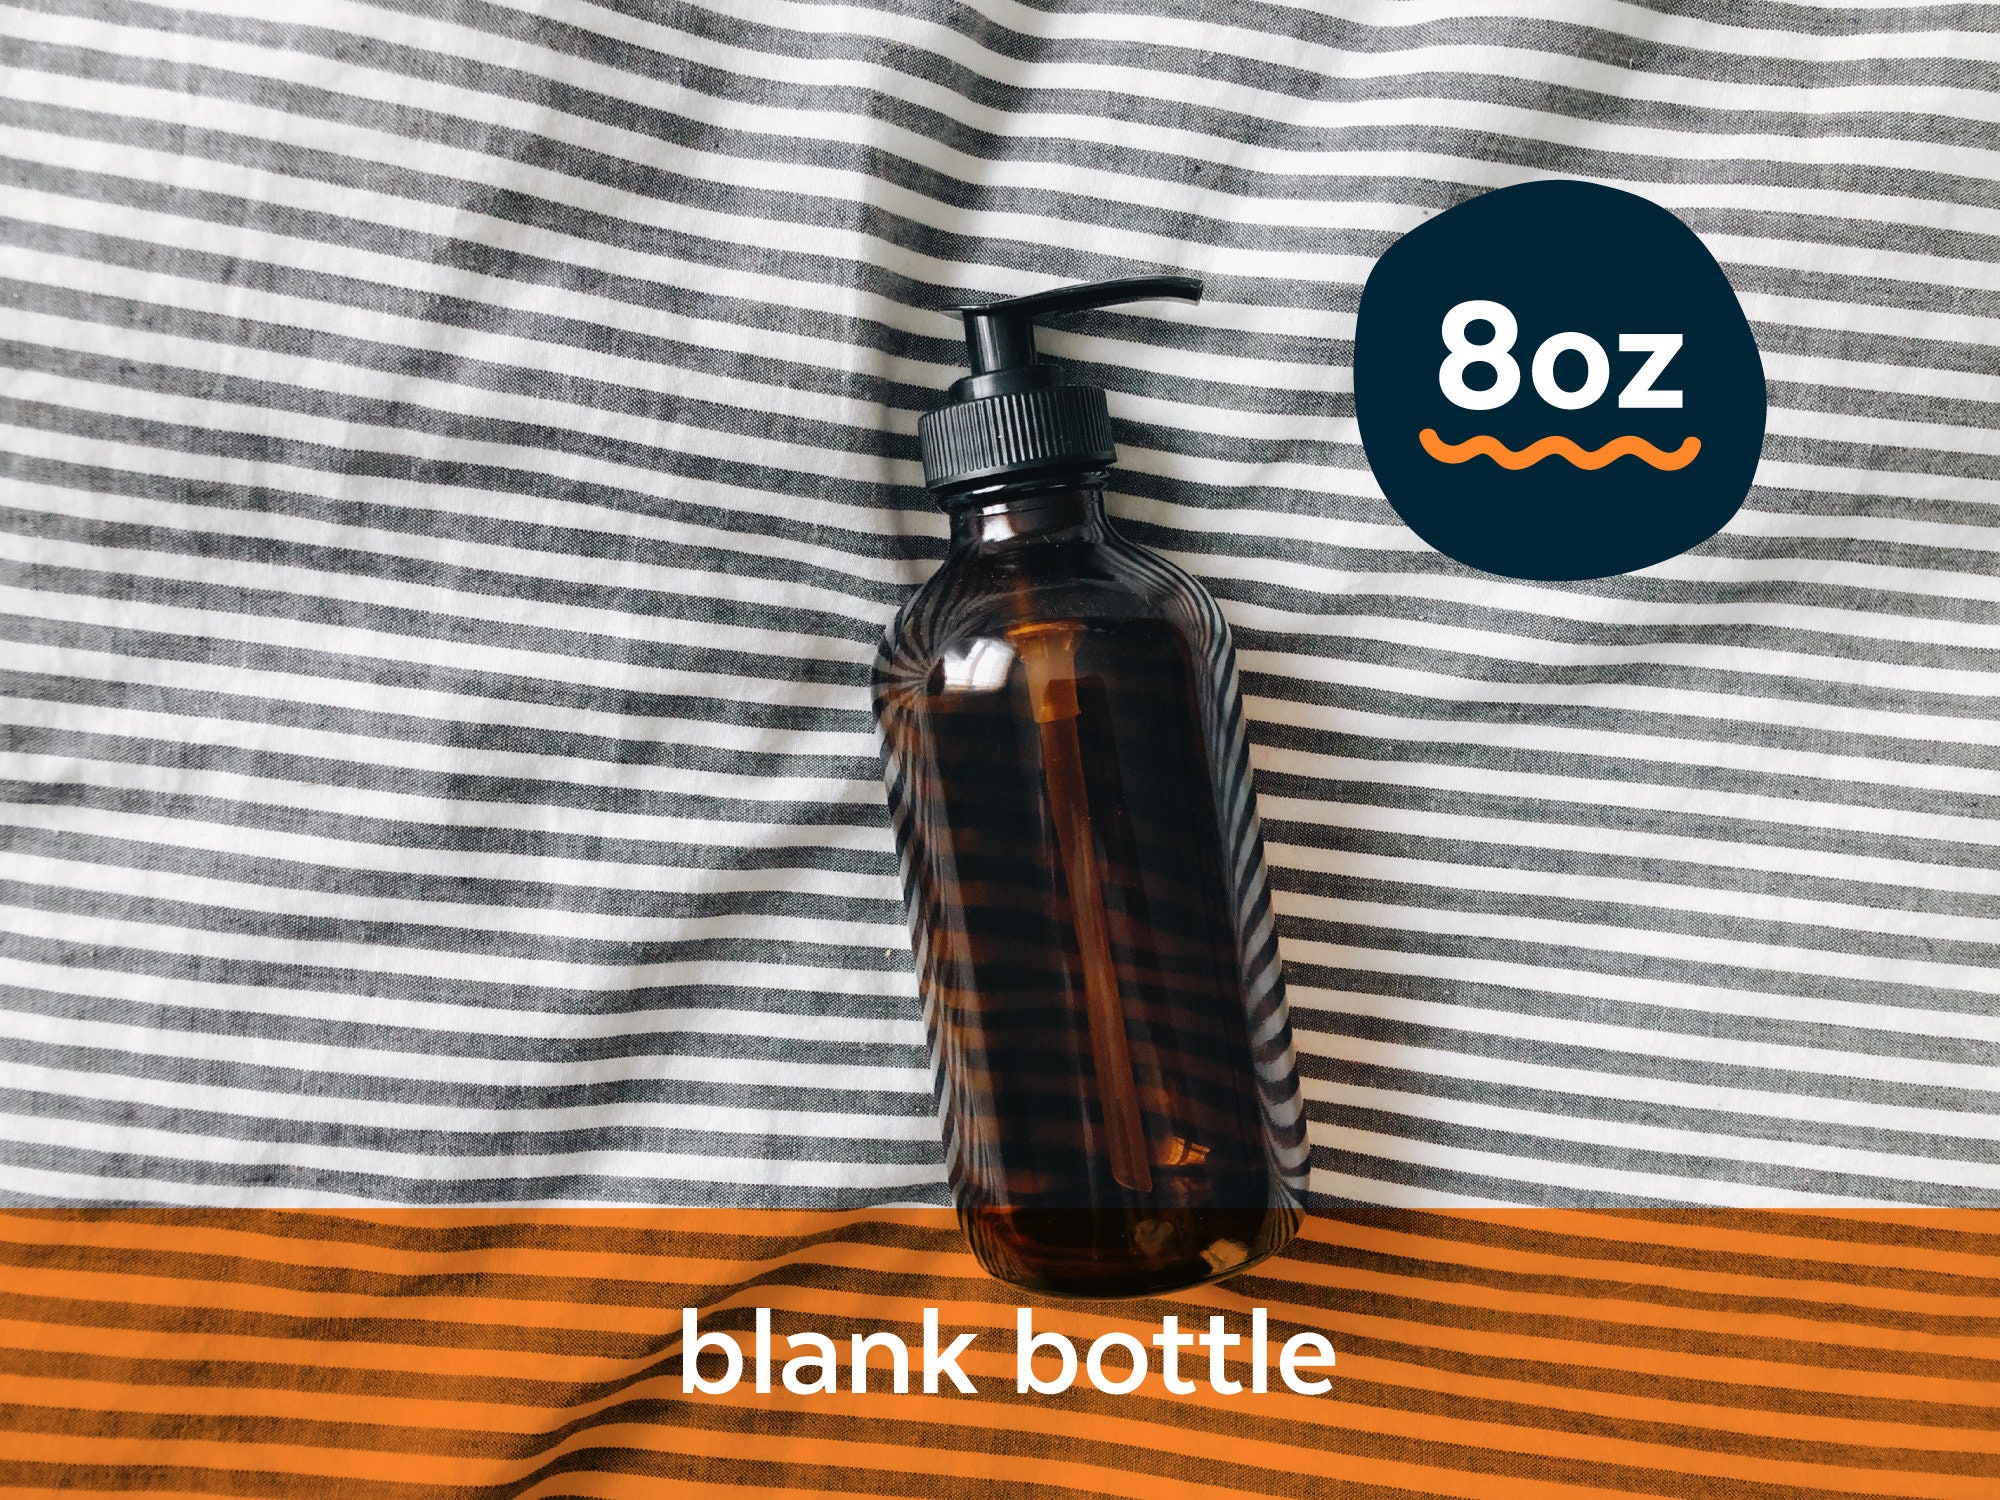 8 oz Amber Glass Bottle with Cap for sale